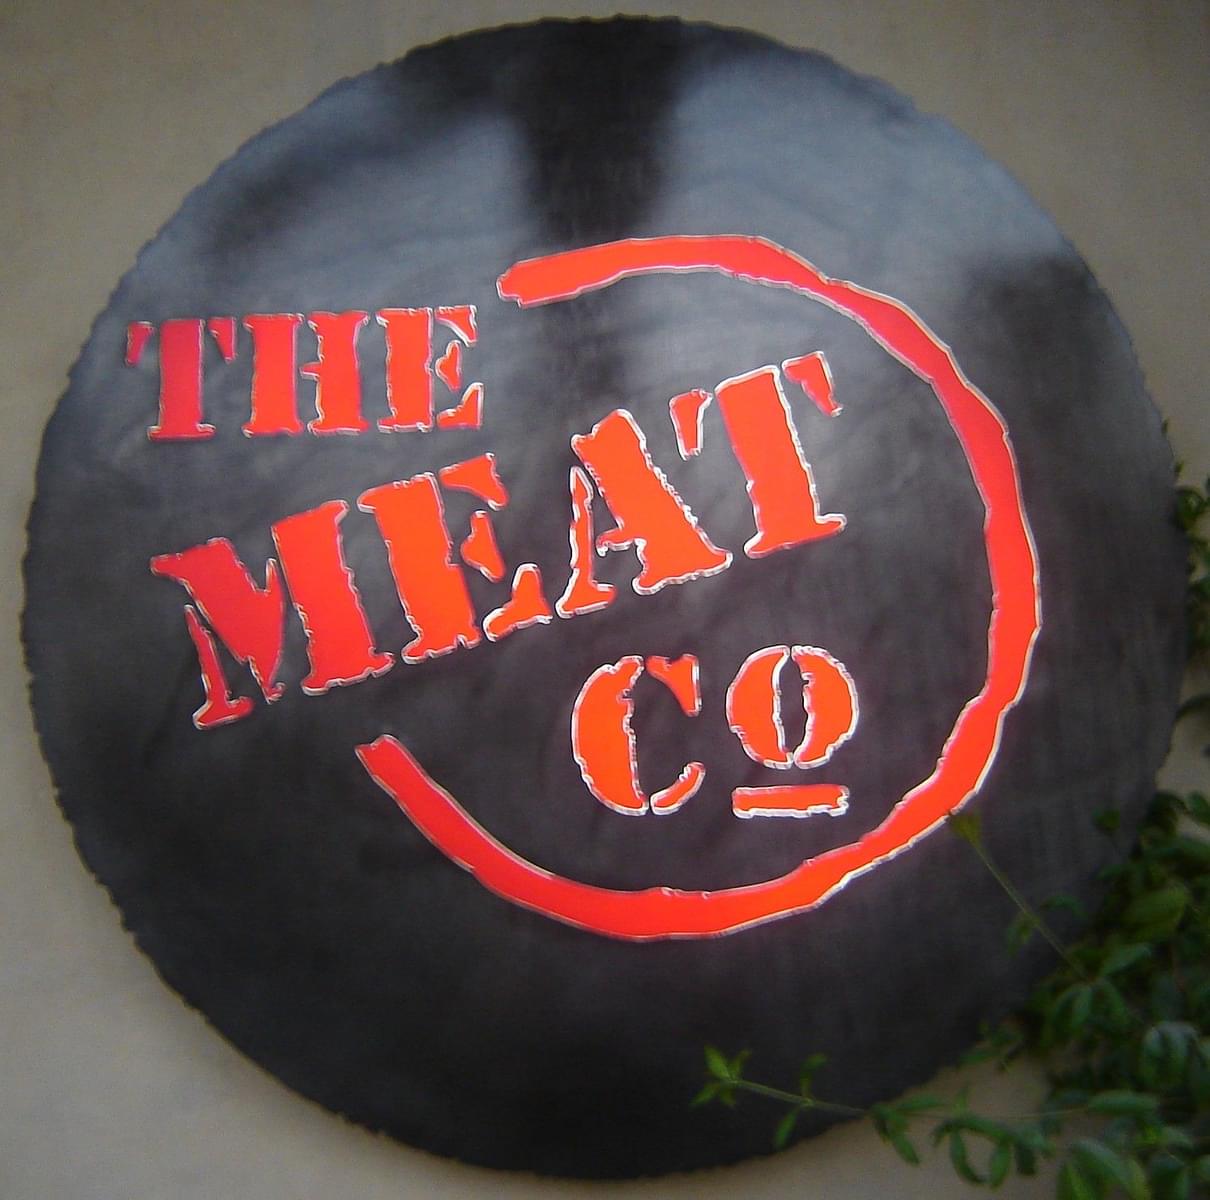 The Meat Co.